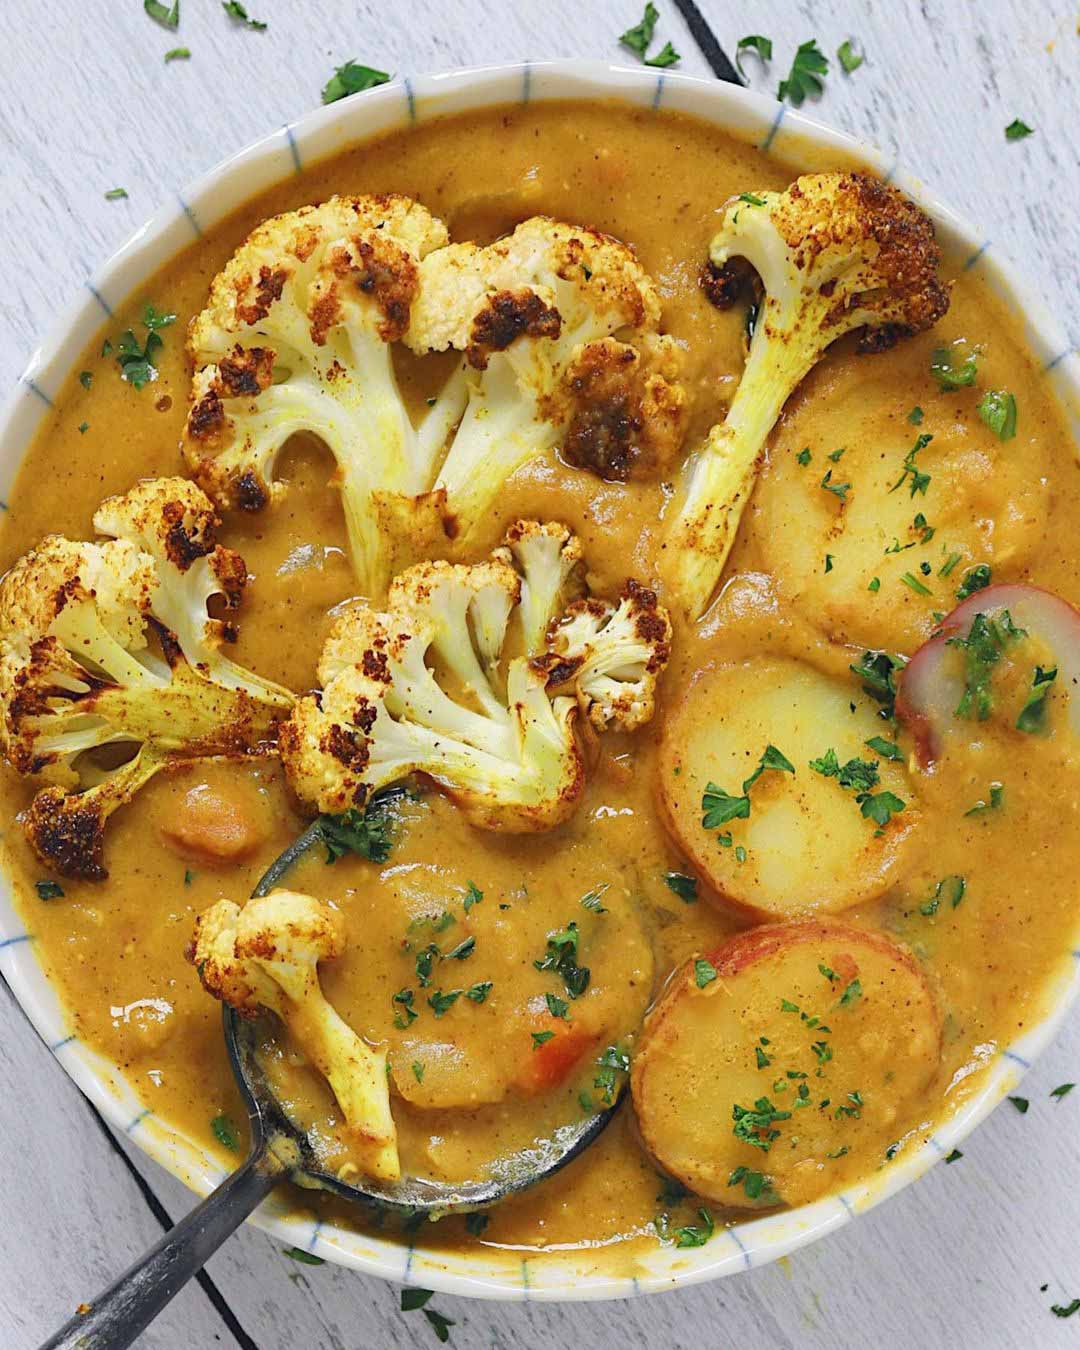 Roasted Cauliflower & Lentil Curry Soup recipe served in a bowl with spoon.